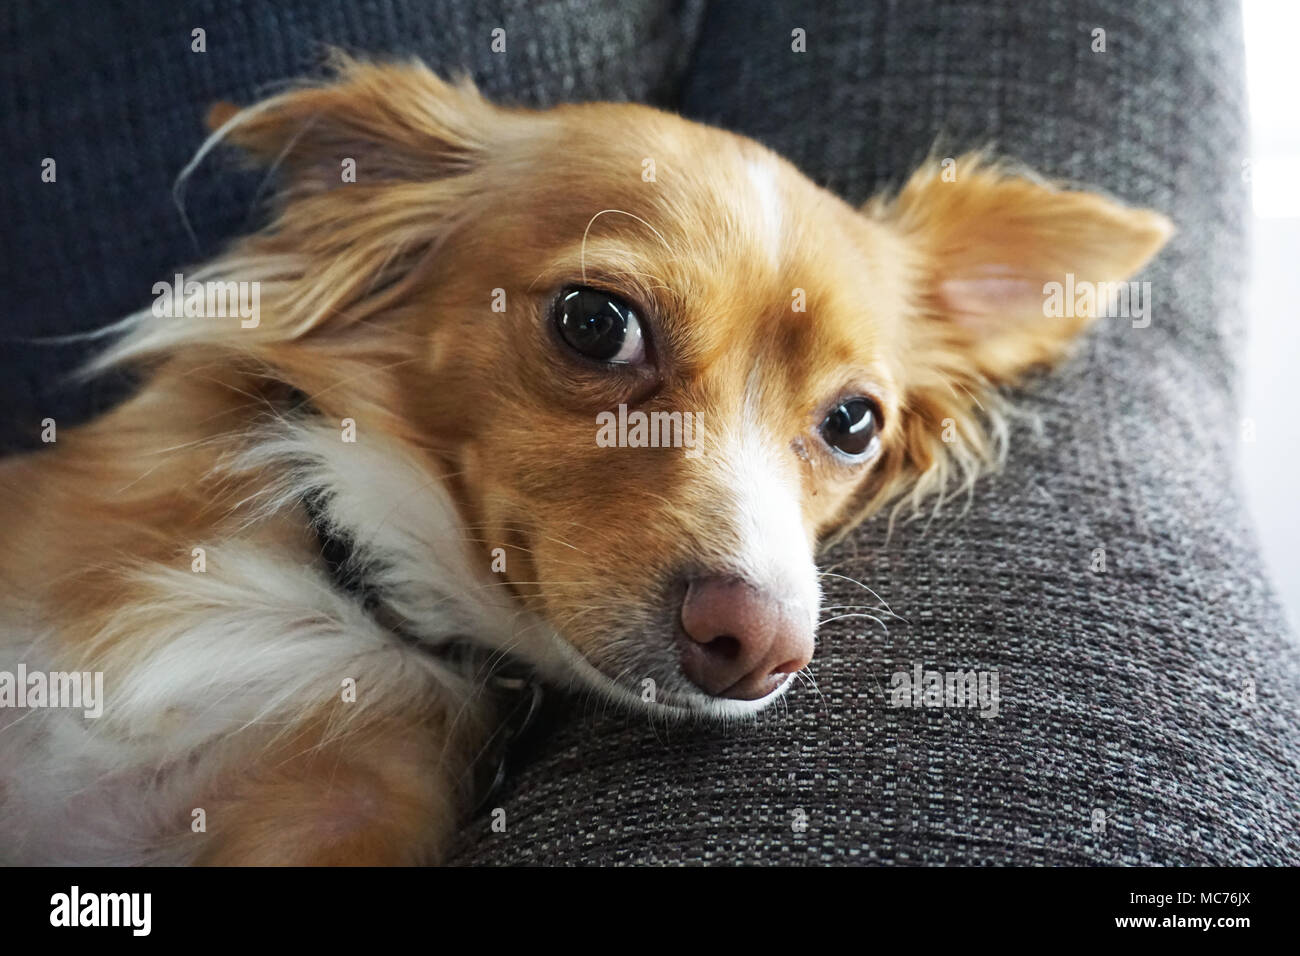 Golden Dog on Couch Stock Photo - Alamy